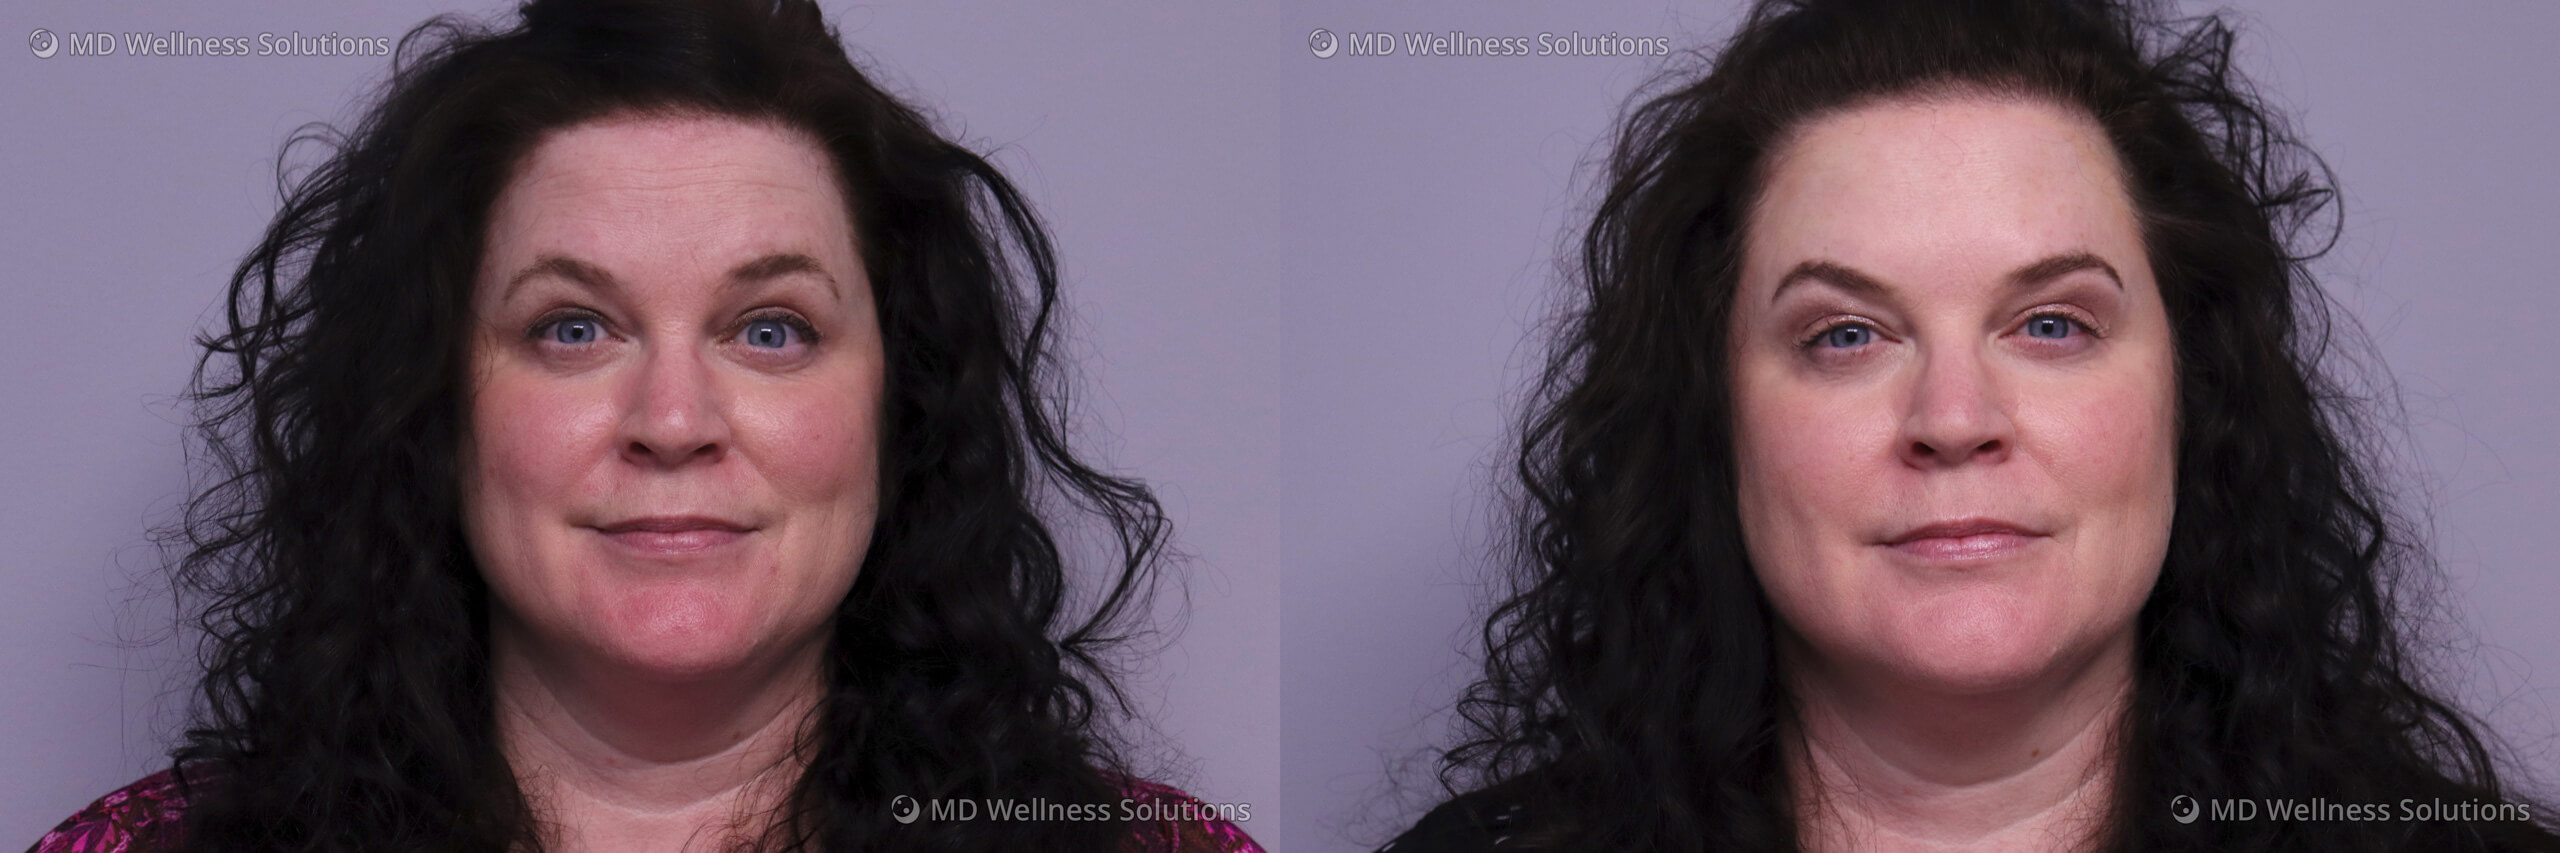 45-54 year old woman before and after neurotoxin treatment